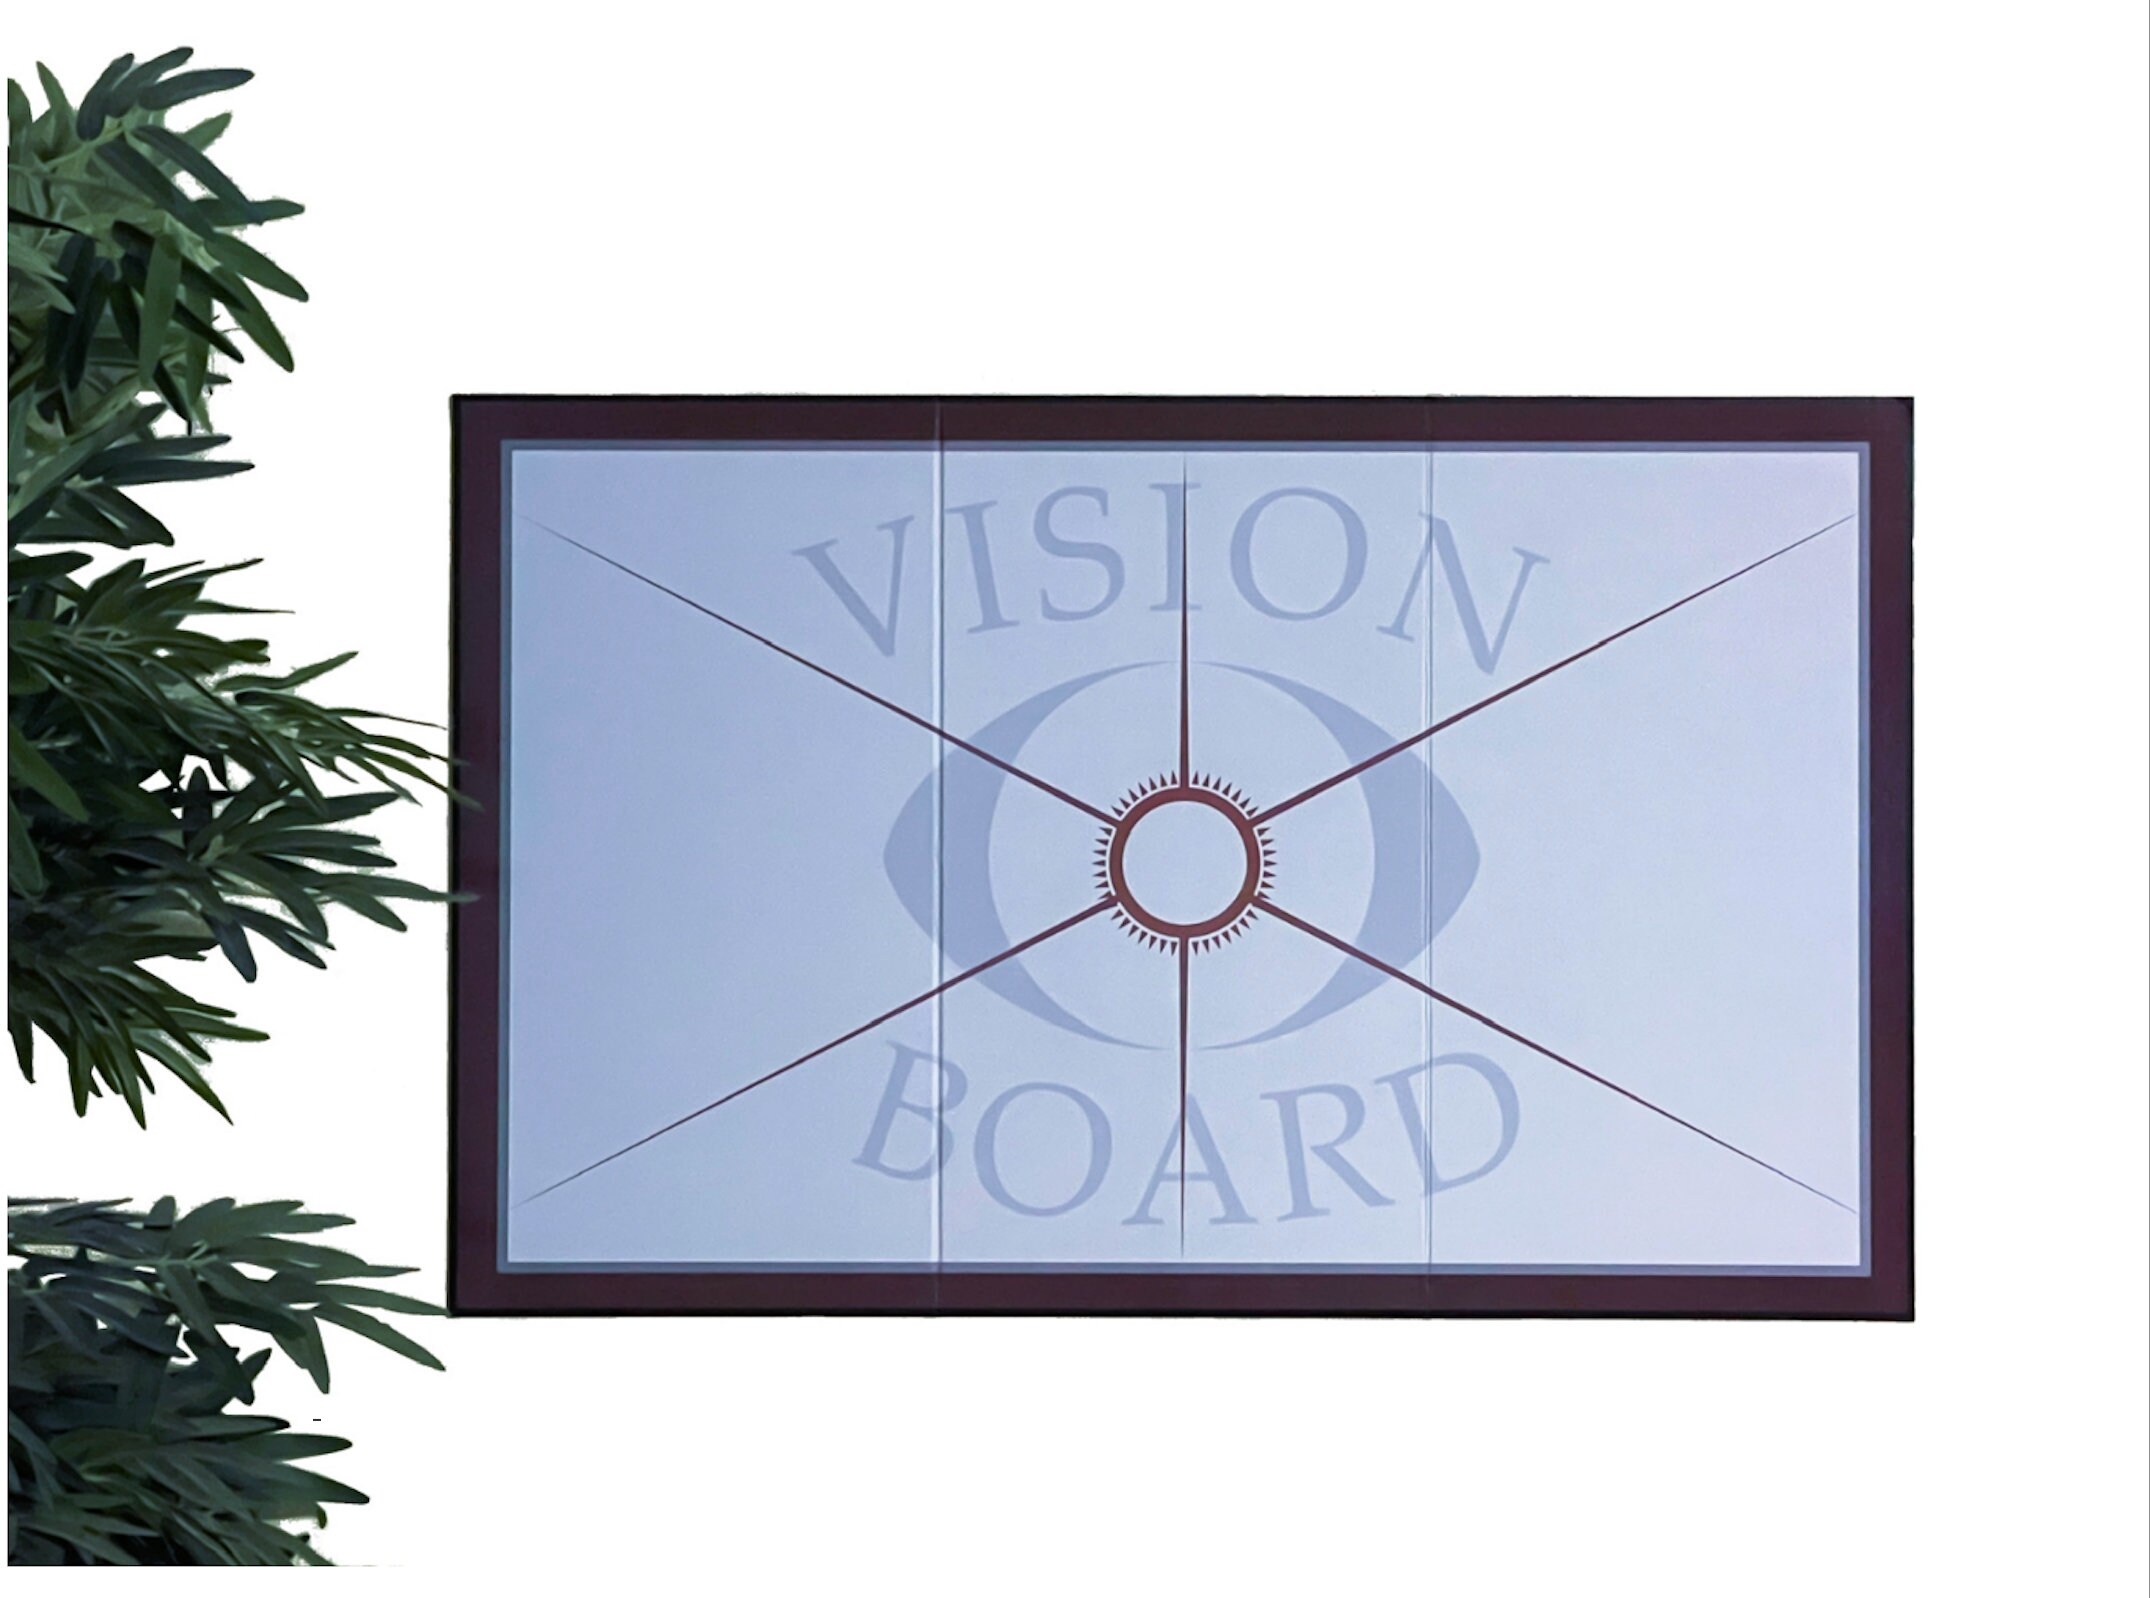 3 in 1 Vision Board: Decorative, Foldable, Dry Erase Vision Board kit with  200+ Motivational Stickers. 27 x 17 Board to Manifest Your Goals Using Law  of Attraction (Zoe)